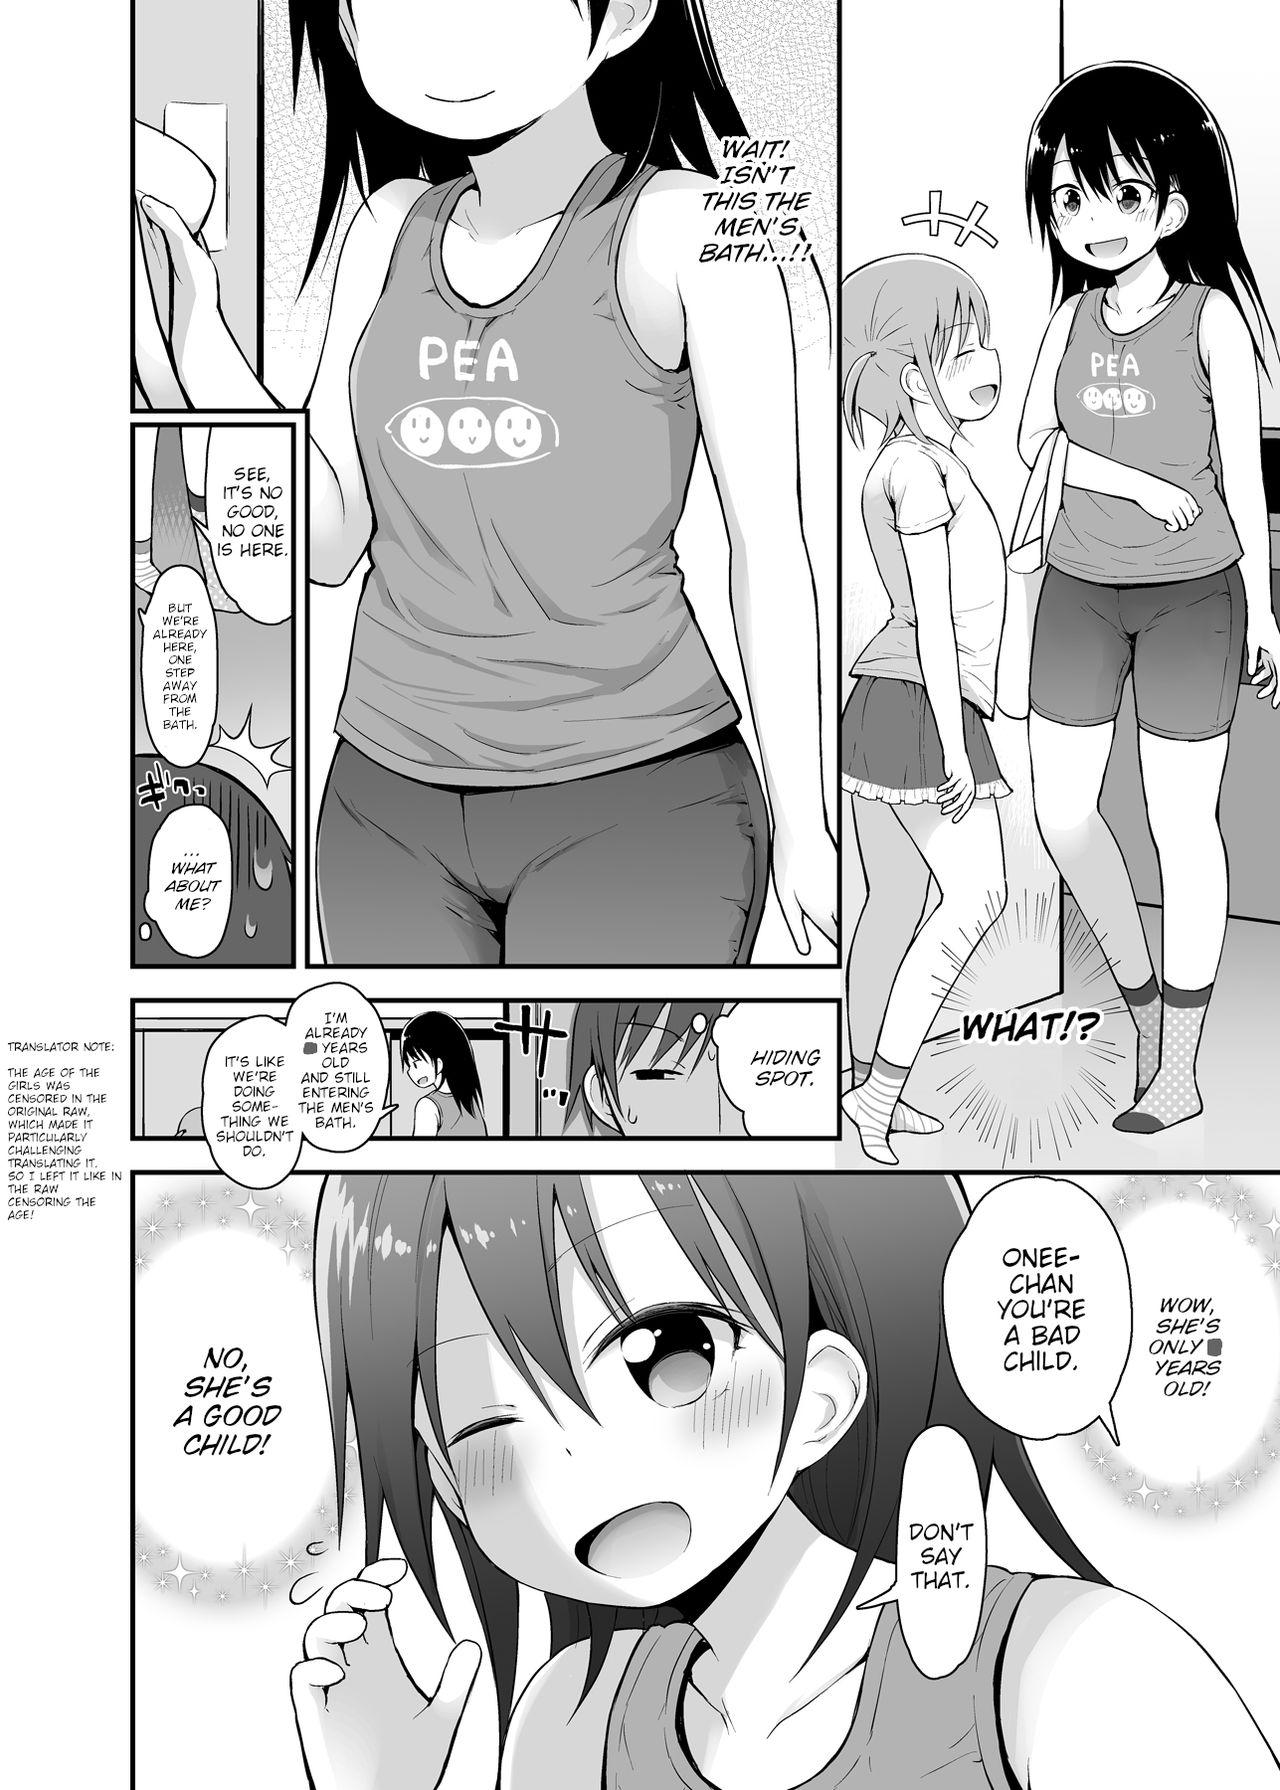 Heels Onnanoko datte Otokoyu ni Hairitai 3 | They may just be little girls, but they still want to enter the men's bath! 3 - Original Brunette - Page 3